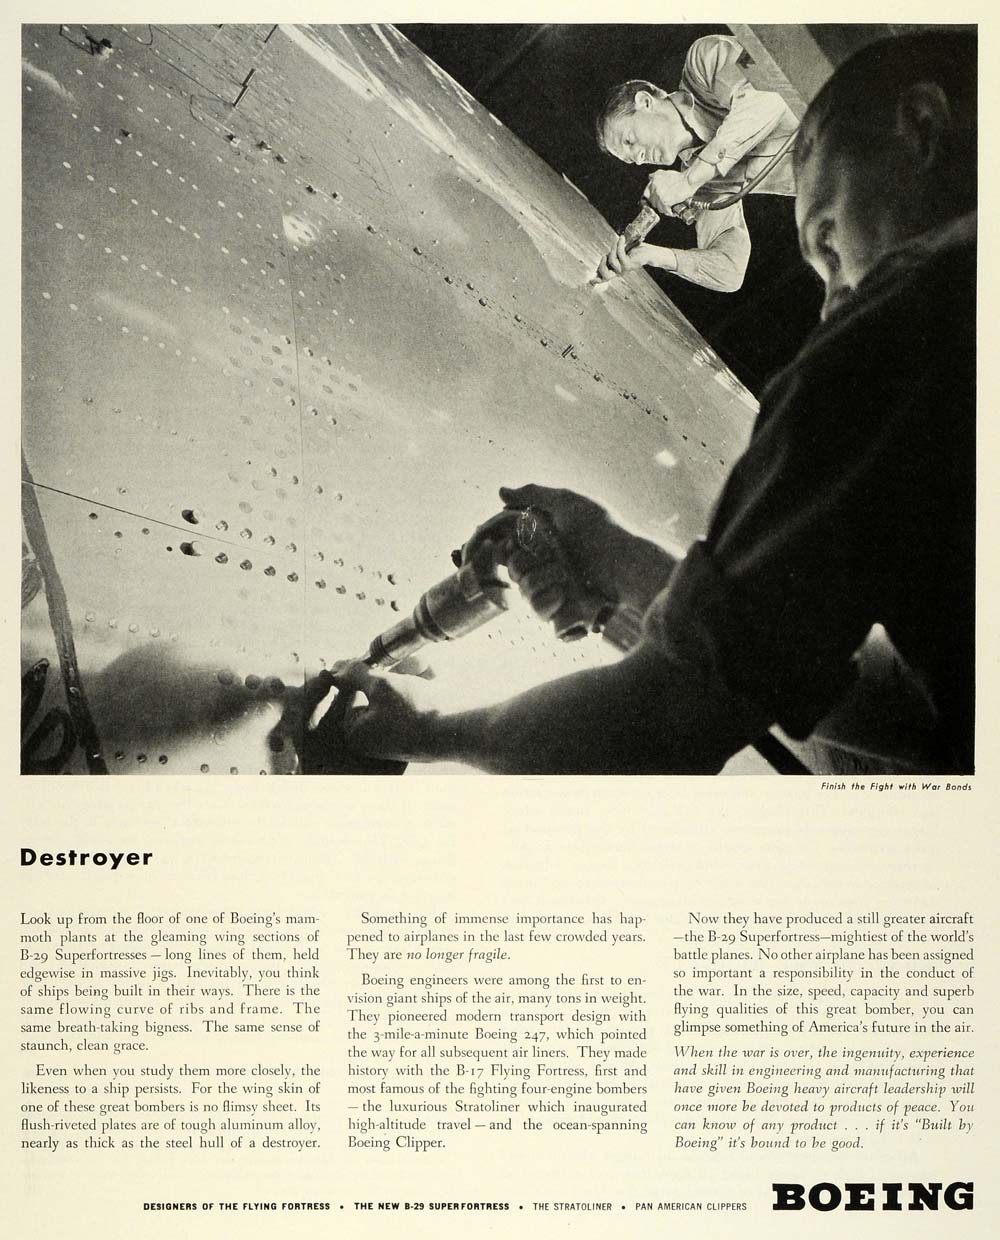 1944 Ad Boeing Co Aerospace Destroyer B-29 Superfortress Bomber Engineers FZ6